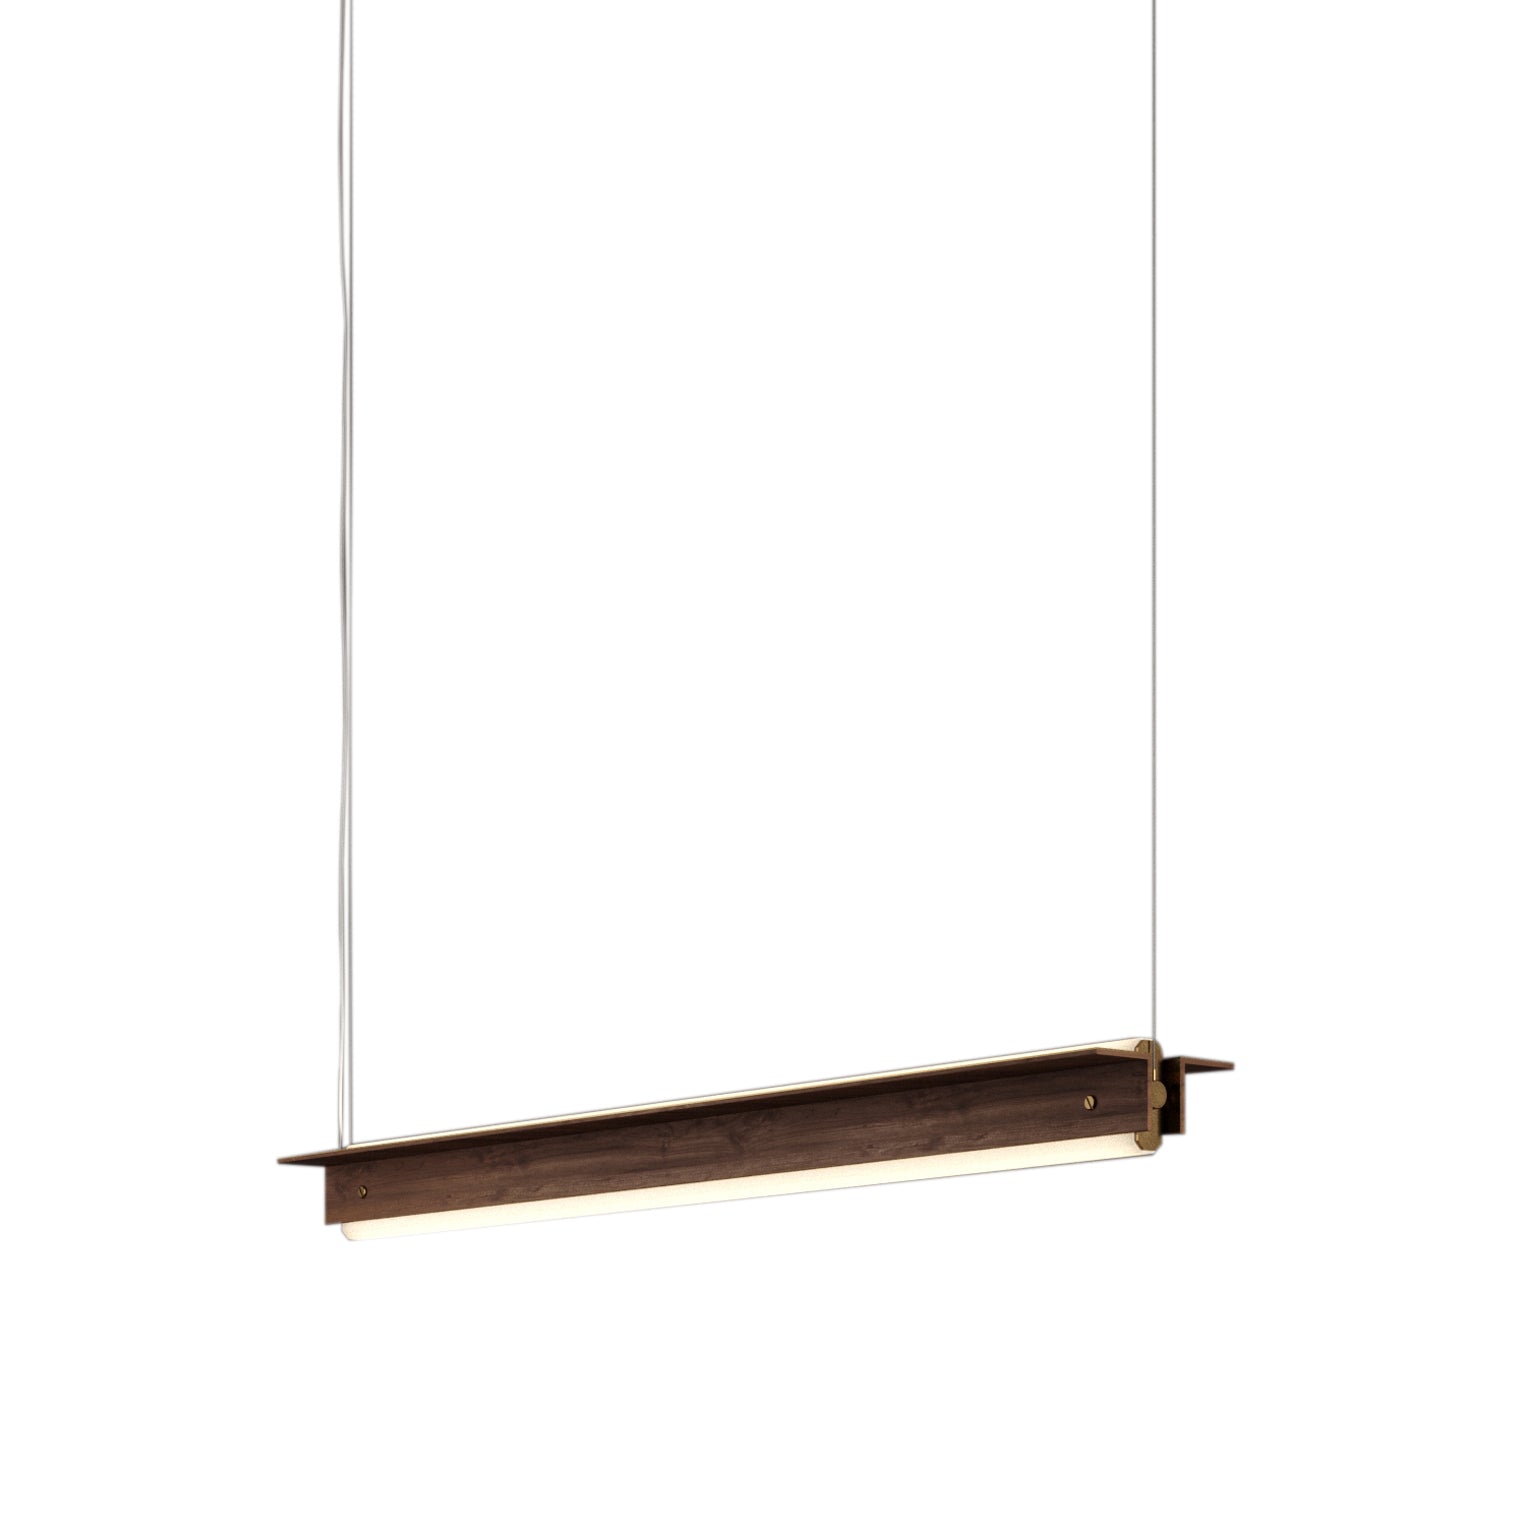 Axis T Suspension Light: Small - 36